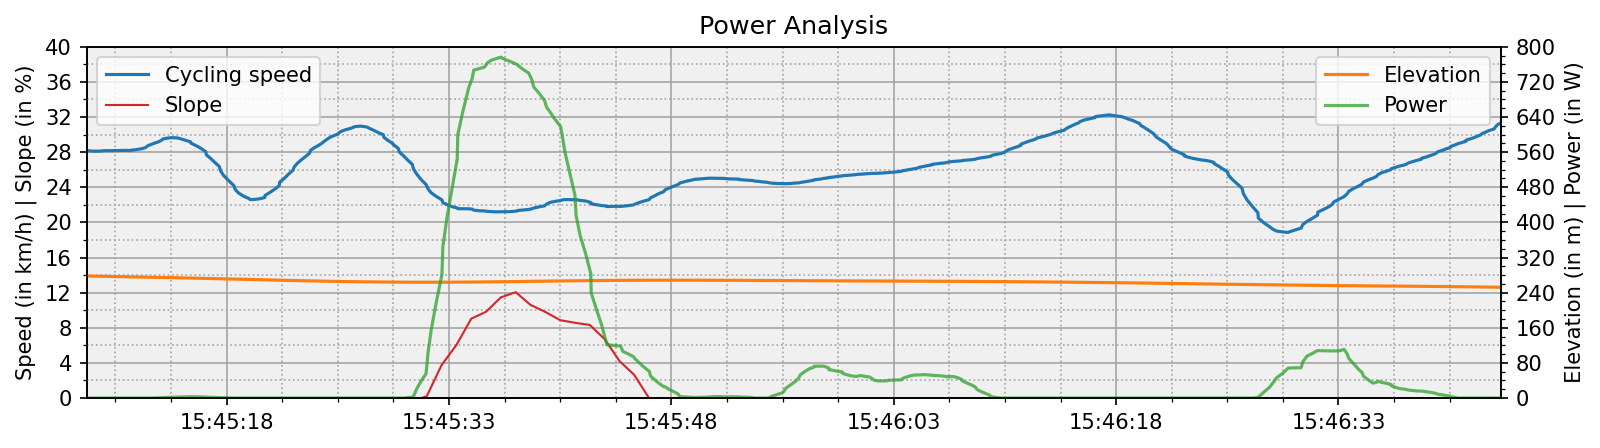 power_analysis_out_of_saddle.png